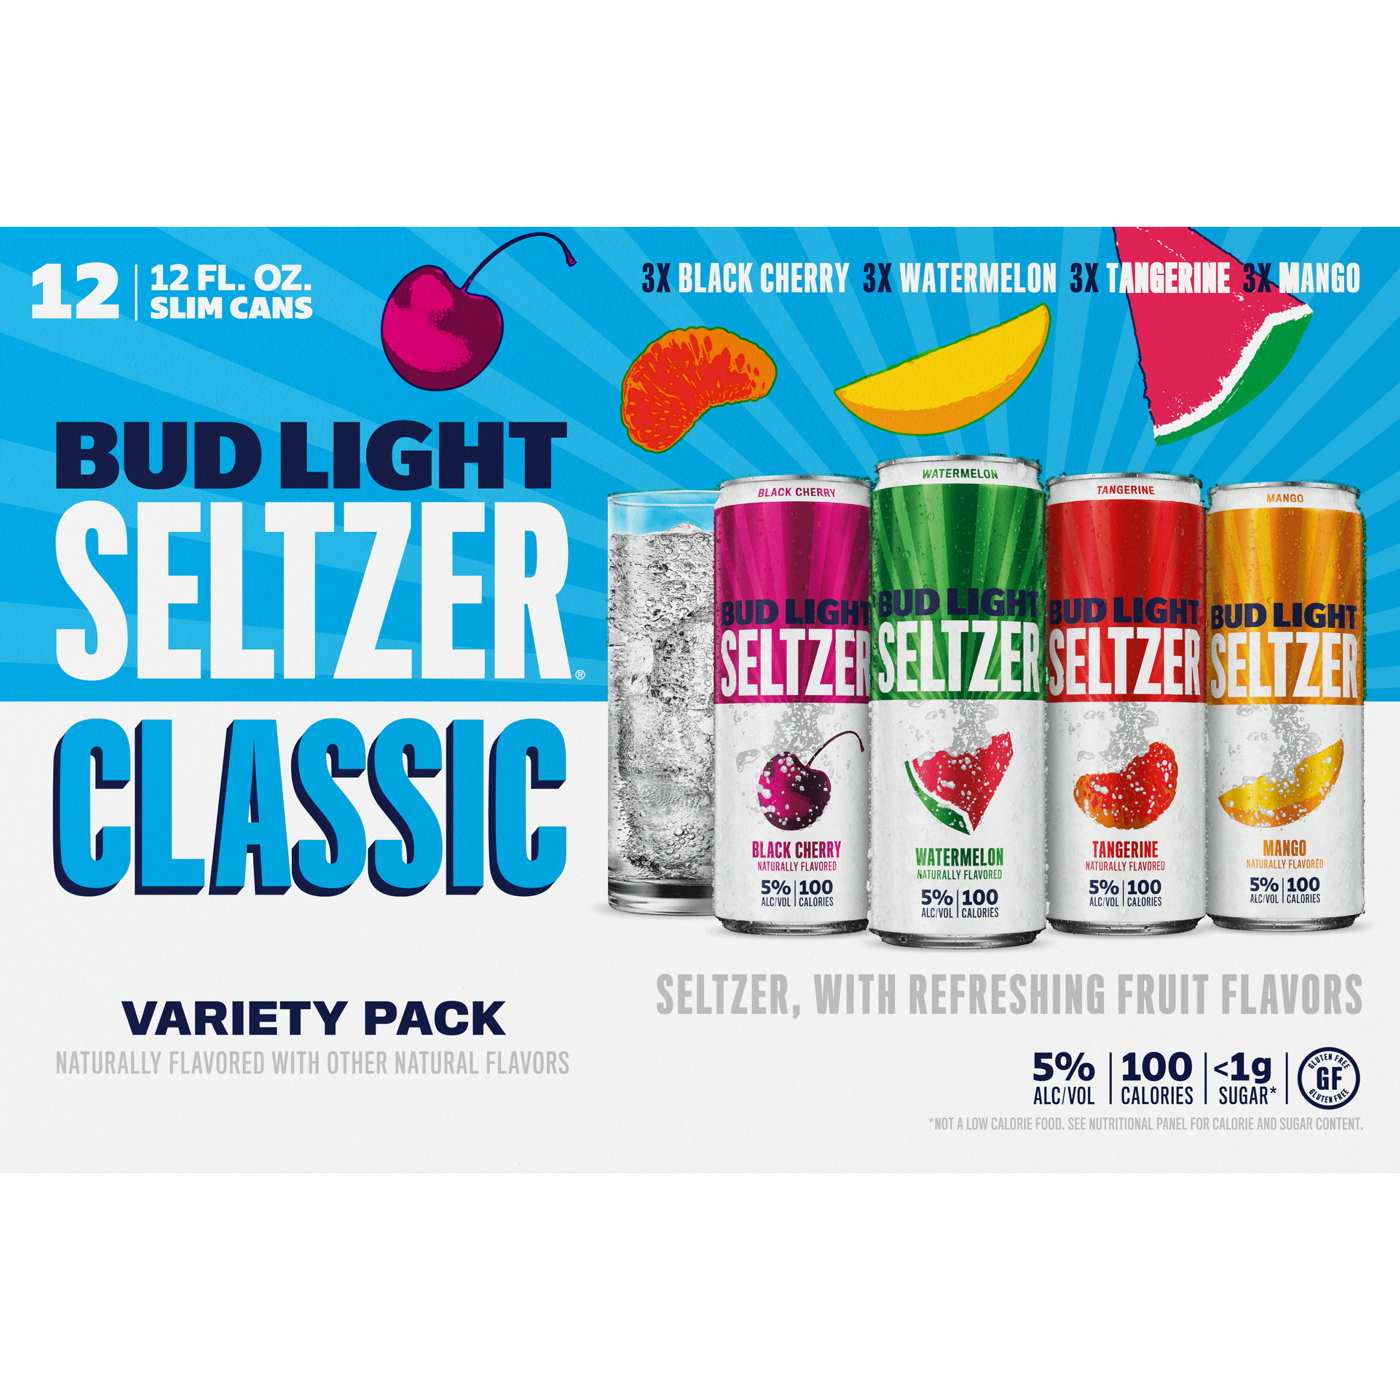 Bud Light Seltzer Classic Variety Pack 12 oz Cans; image 2 of 2